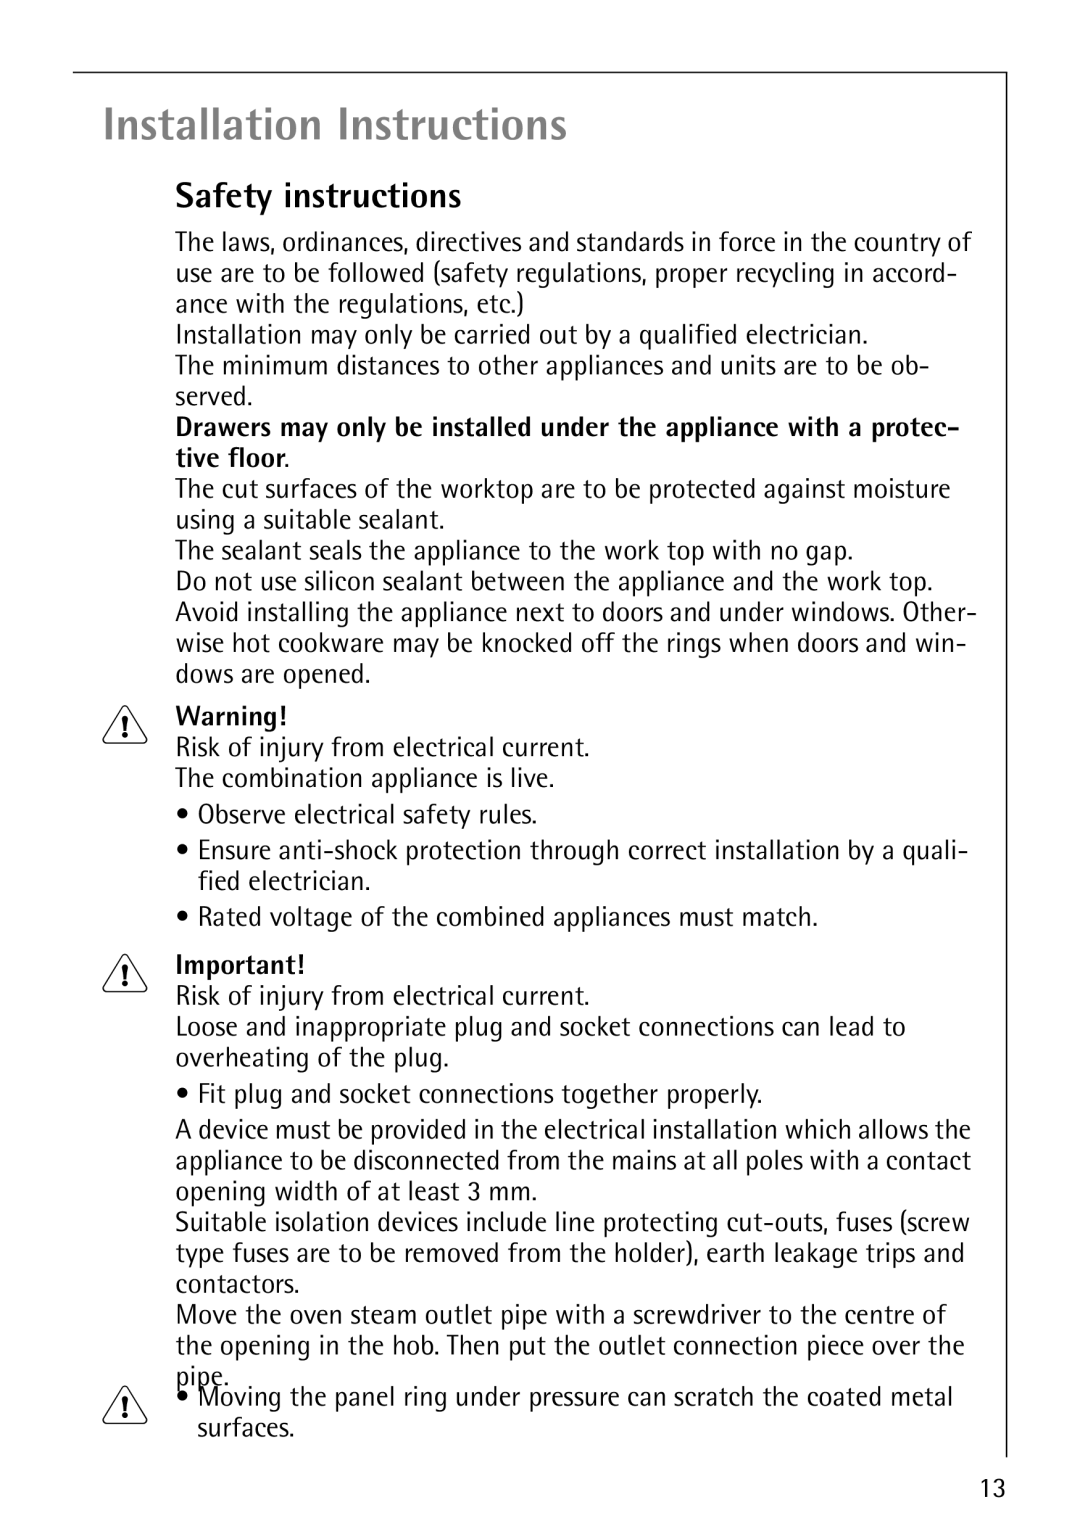 Electrolux 6204 operating instructions Installation Instructions, Safety instructions 